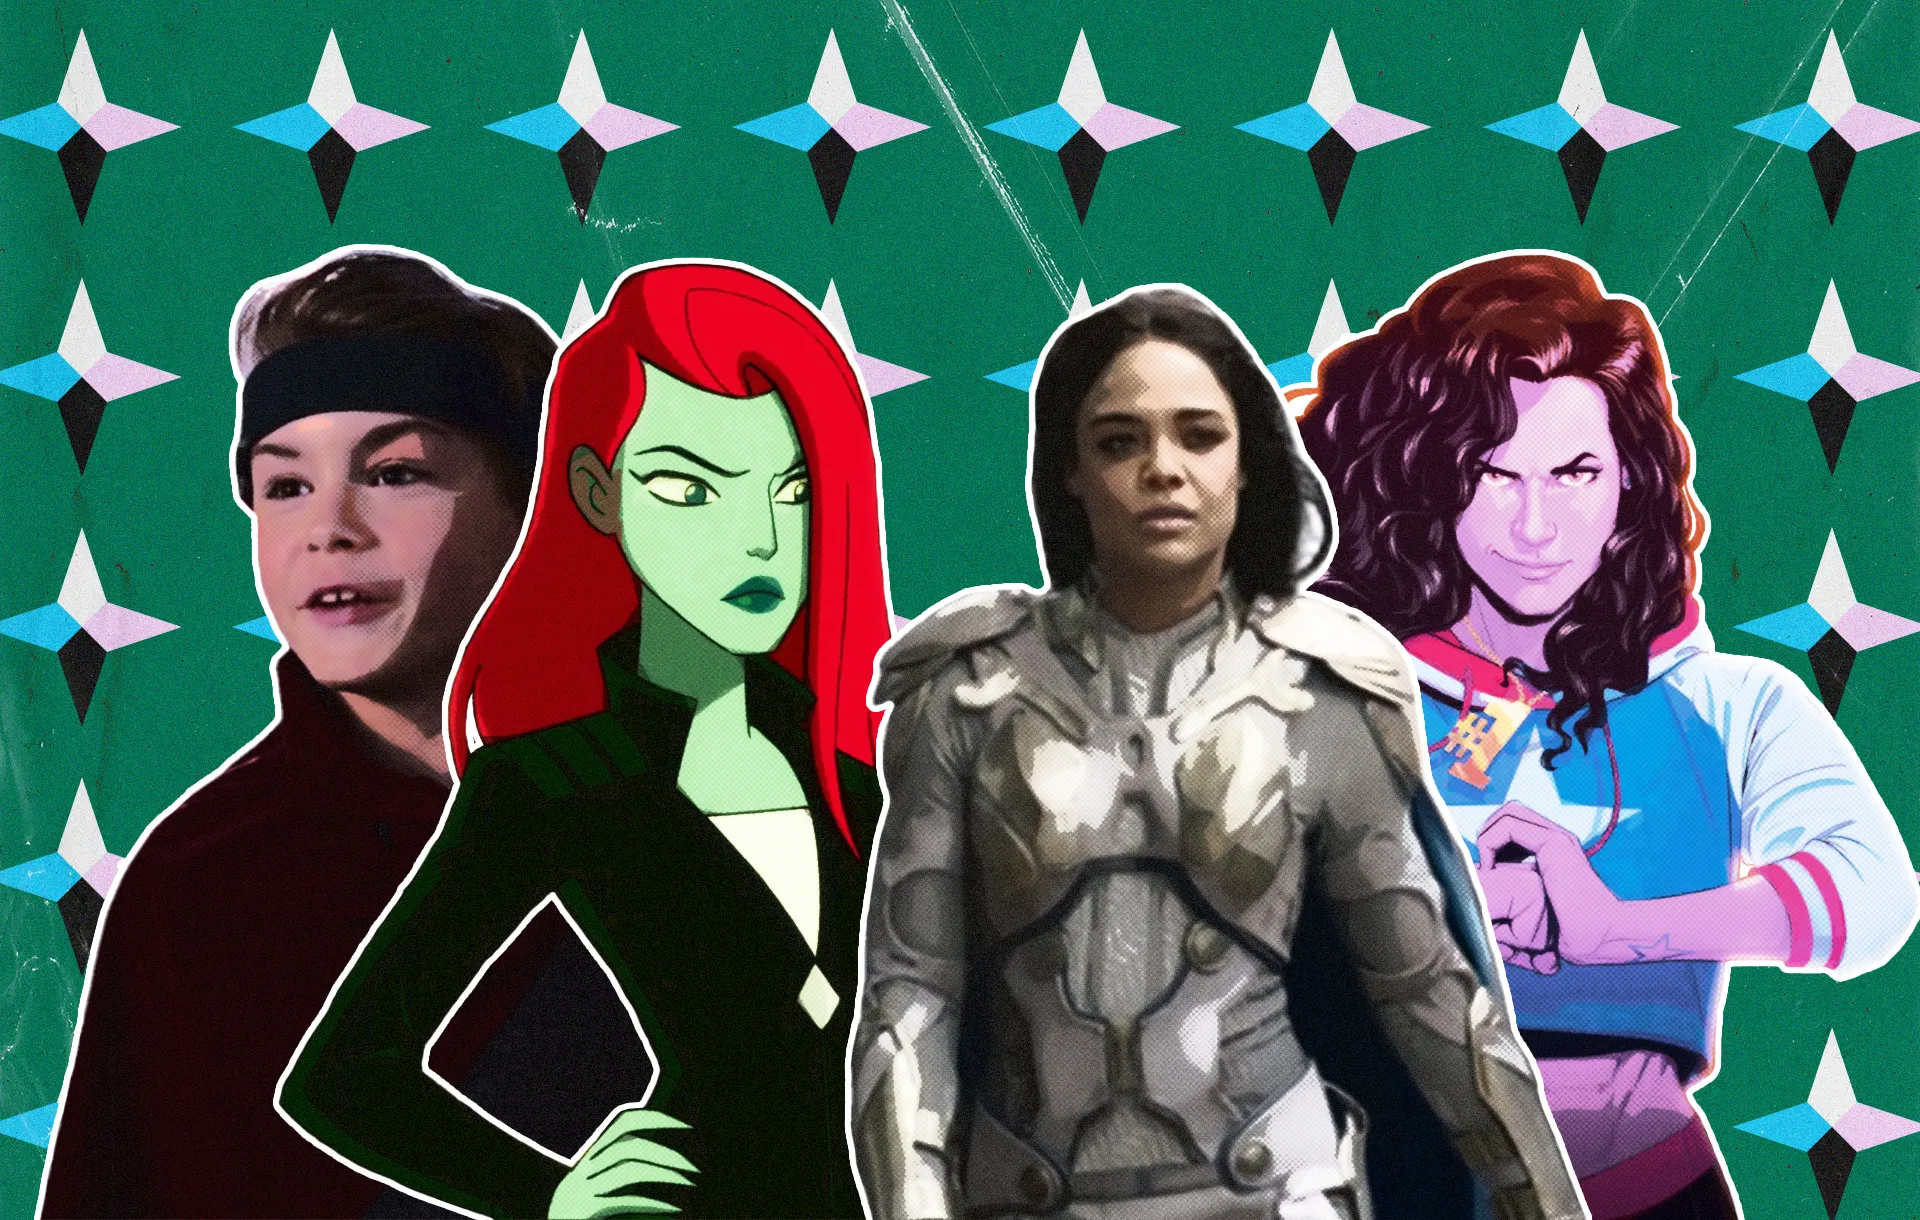 From Comics to Blockbusters: How Superhero Franchises are Becoming More LGBTQ-Inclusive | Features | LIVING LIFE FEARLESS